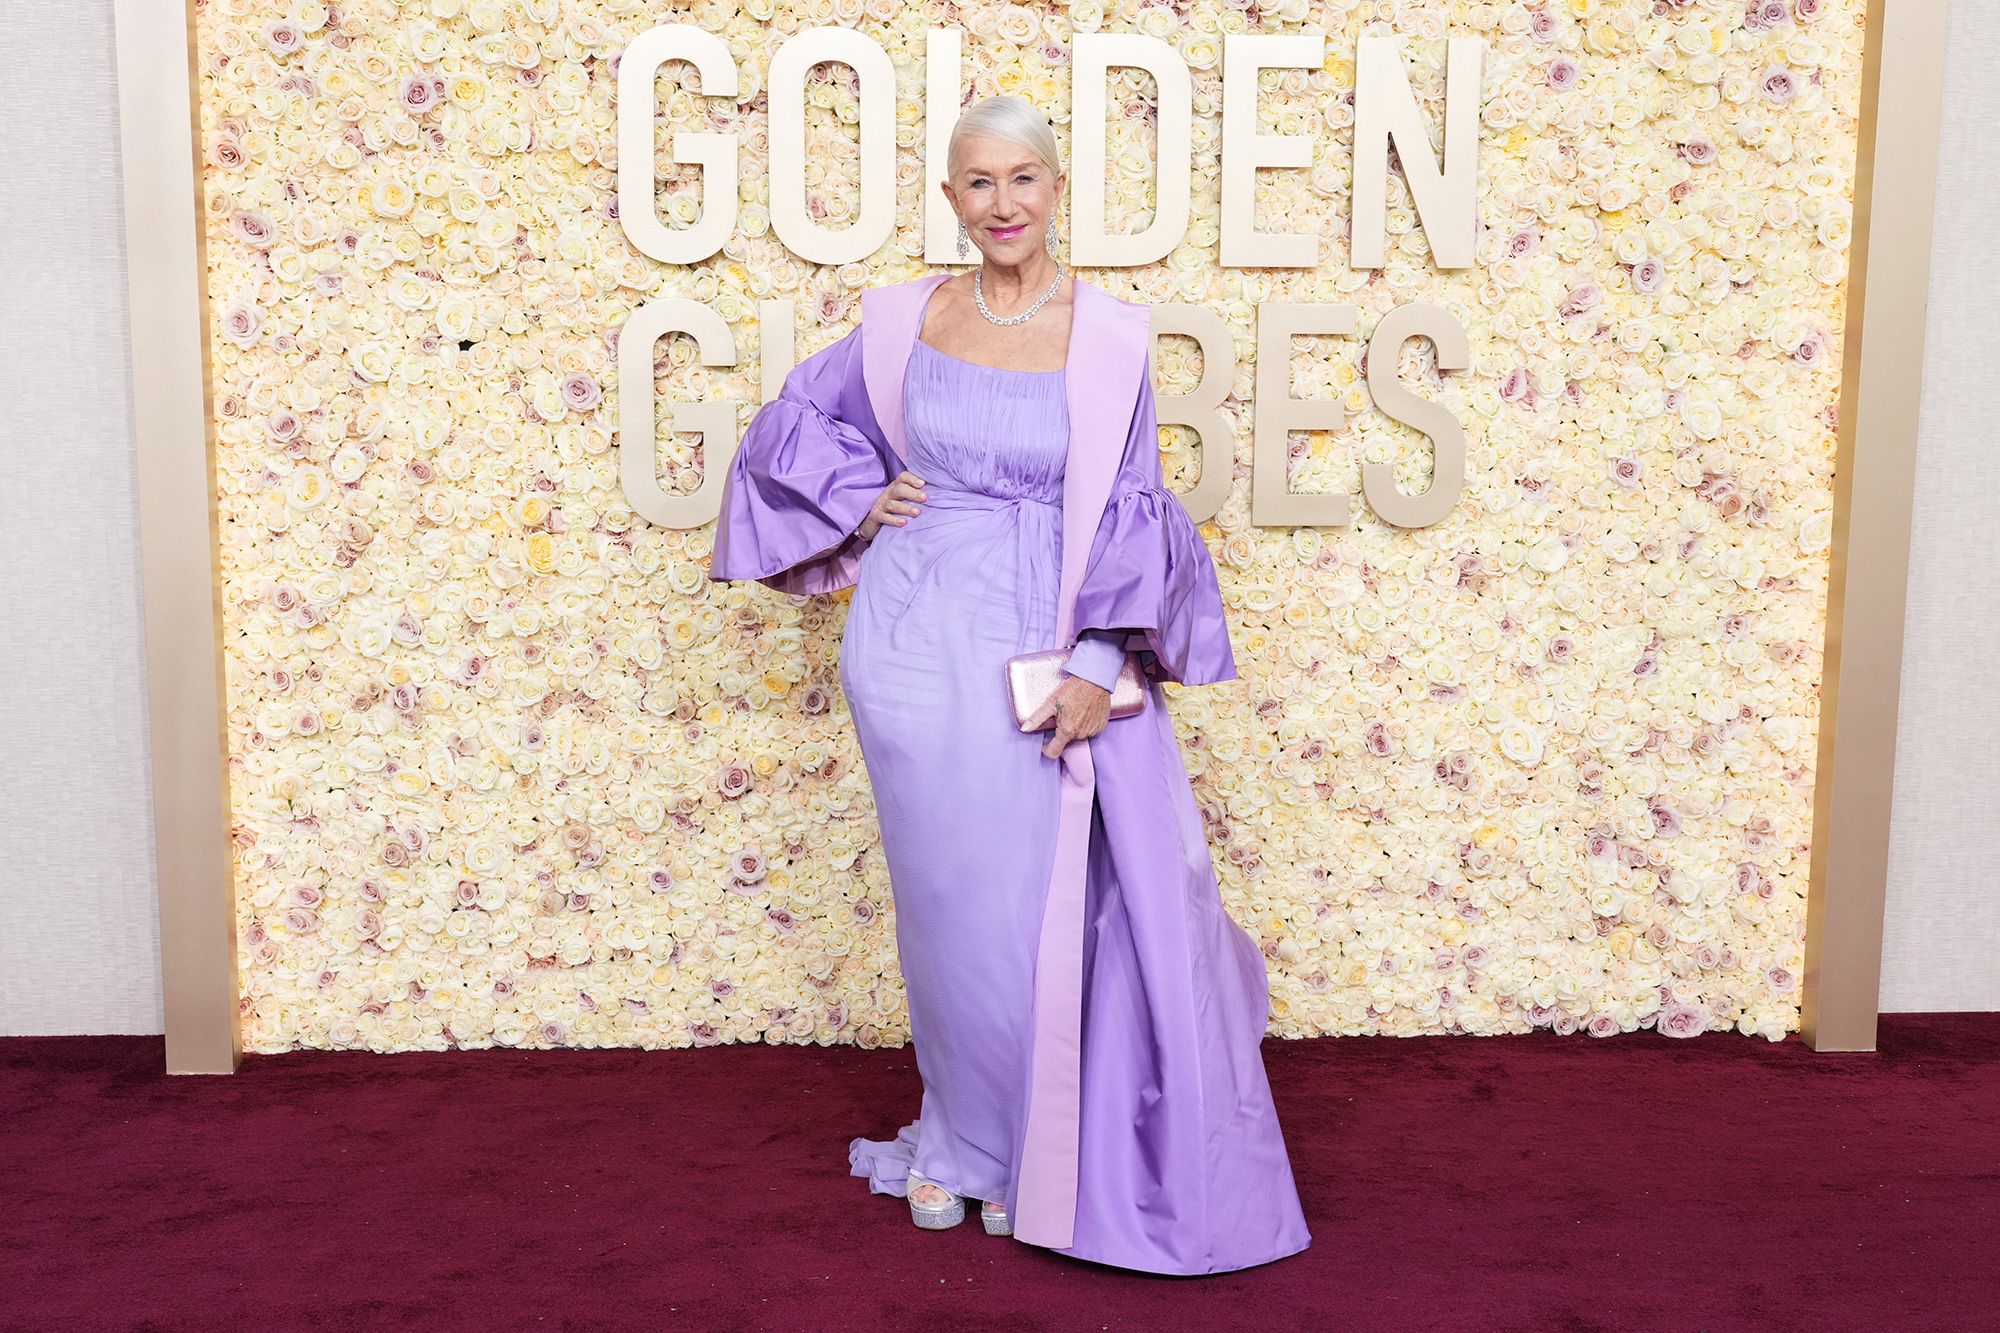 Dame Helen Mirren looked regal in a lavender Dolce & Gabbana dress and oversized puff-sleeved opera coat, silver platforms by Sole Bliss and Harry Winston jewelry. (Photo byJordan Strauss/Invision/AP)